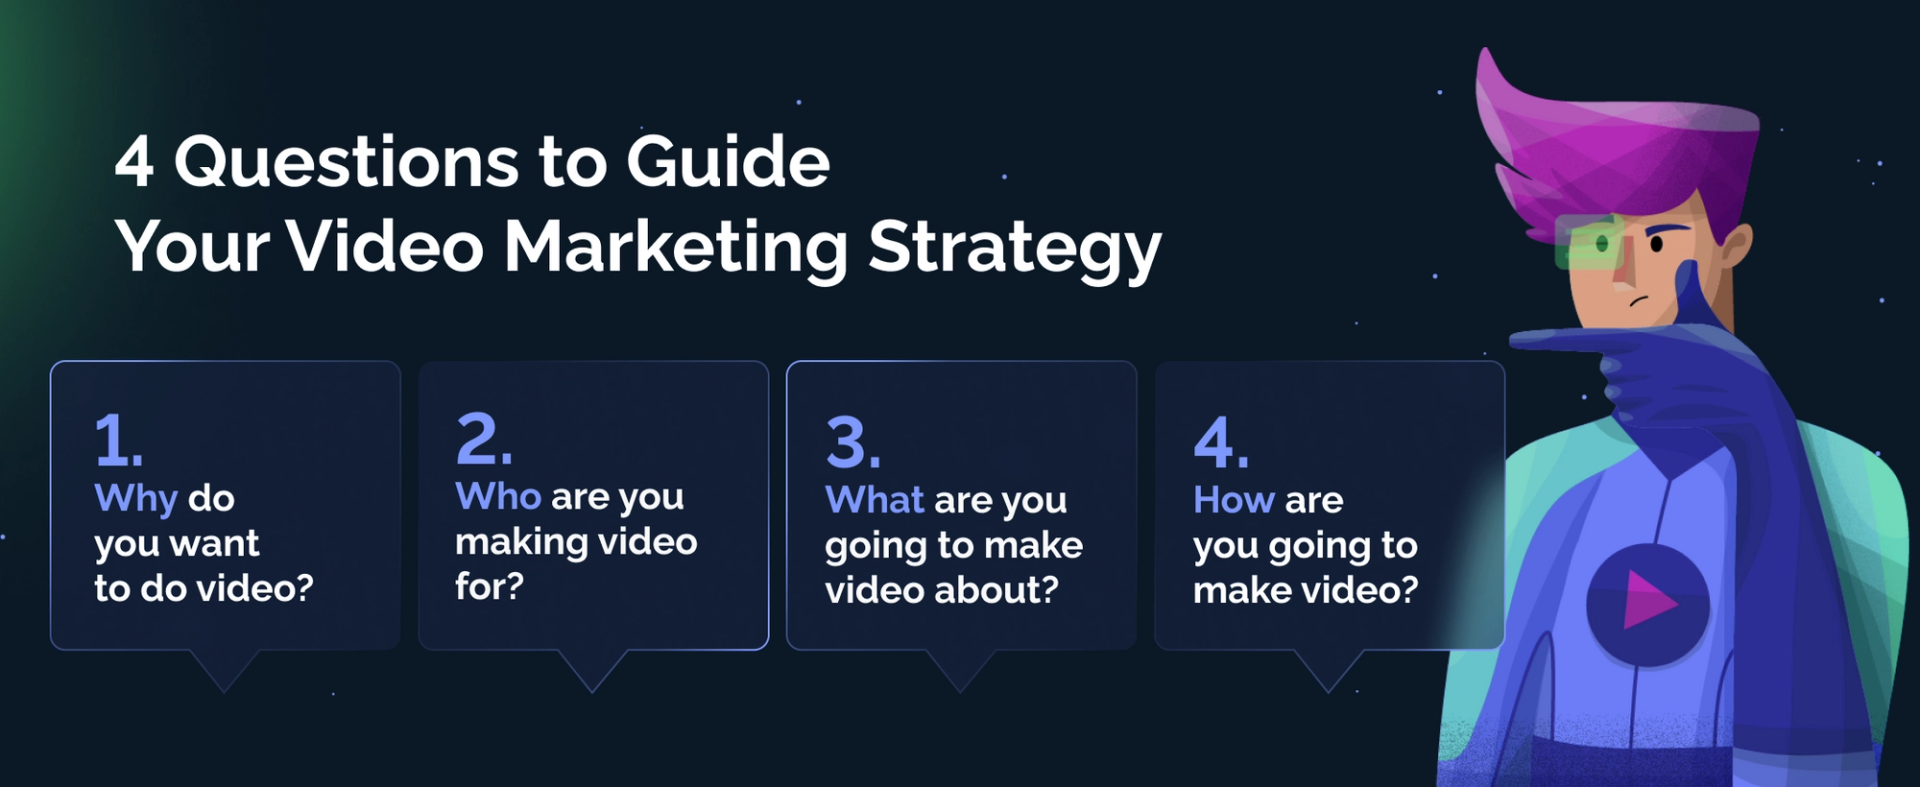 4 Questions to Guide Your Video Marketing Strategy: (1) Why do you want to do video? (2) Who are you making video for? (3) What are you going to make video about? (4) How are you going to make video?